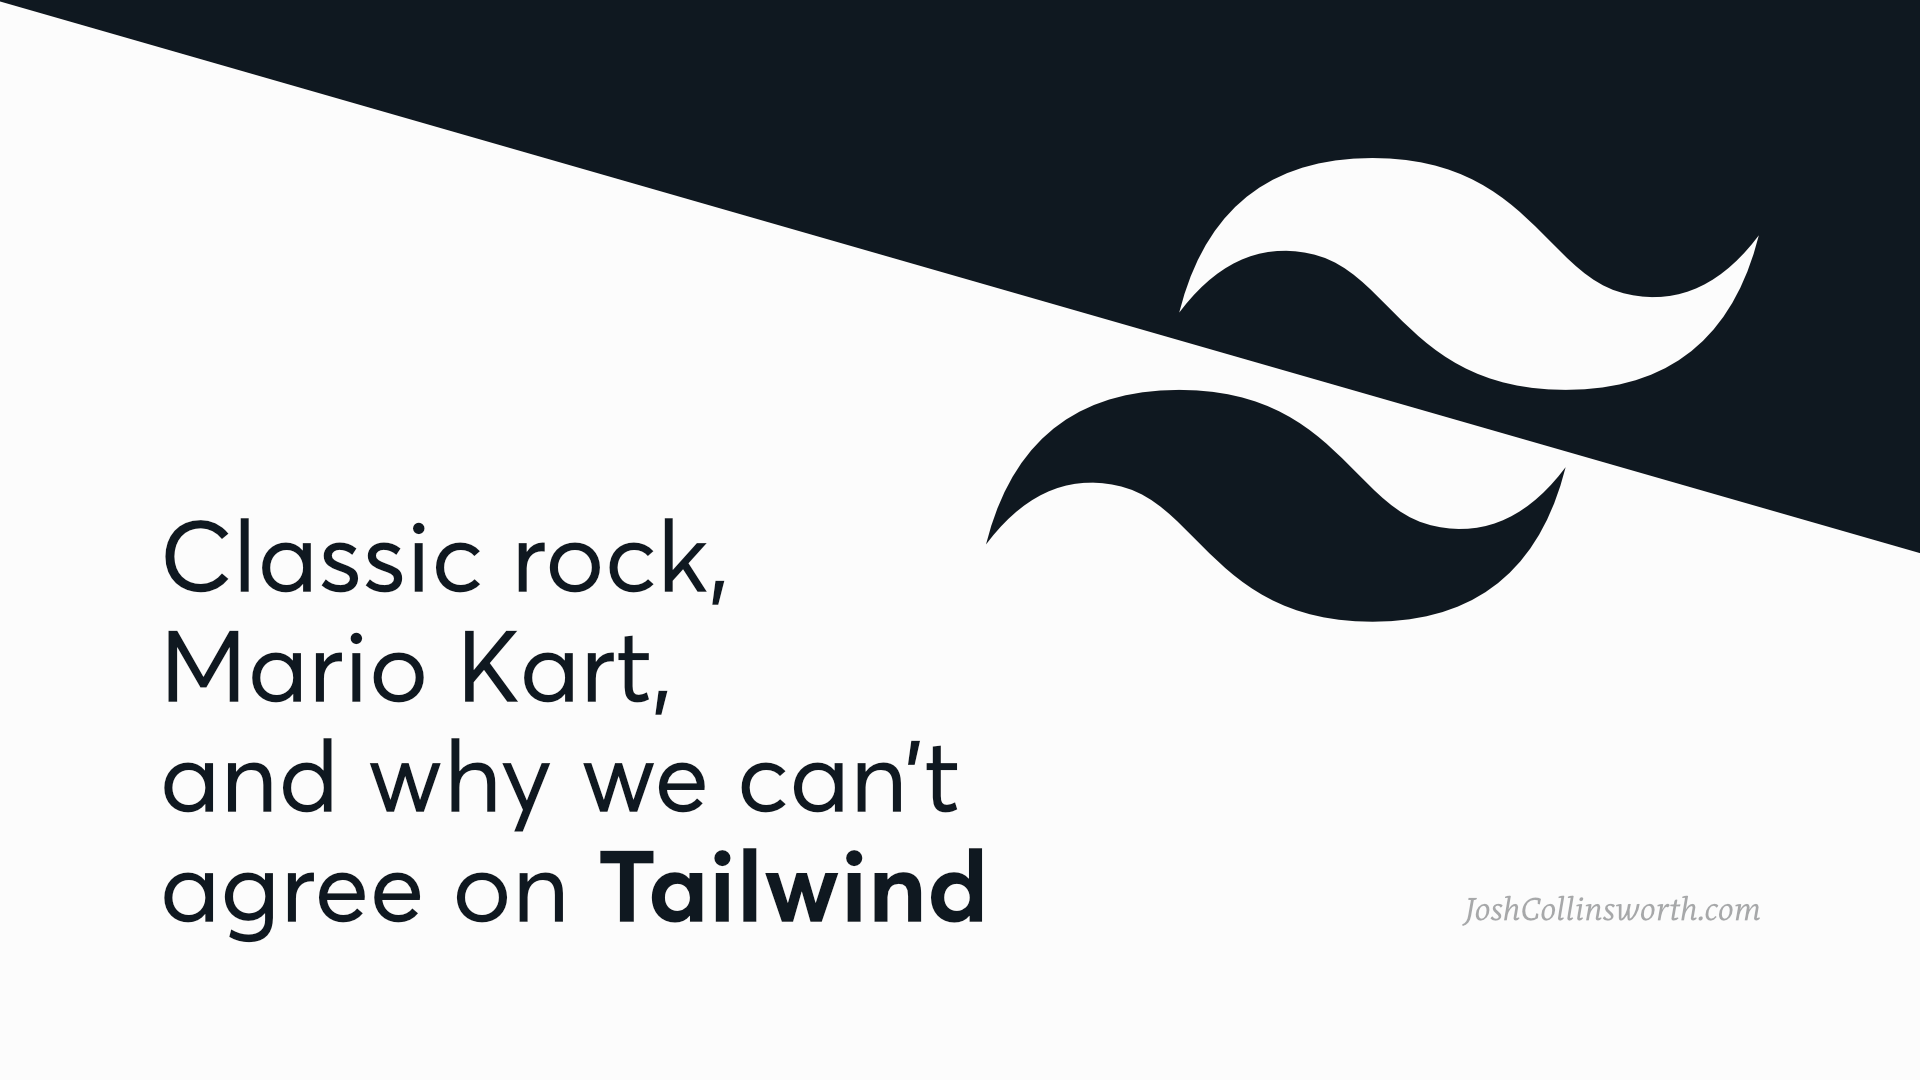 Preview image for Classic rock, Mario Kart, and why we can't agree on Tailwind